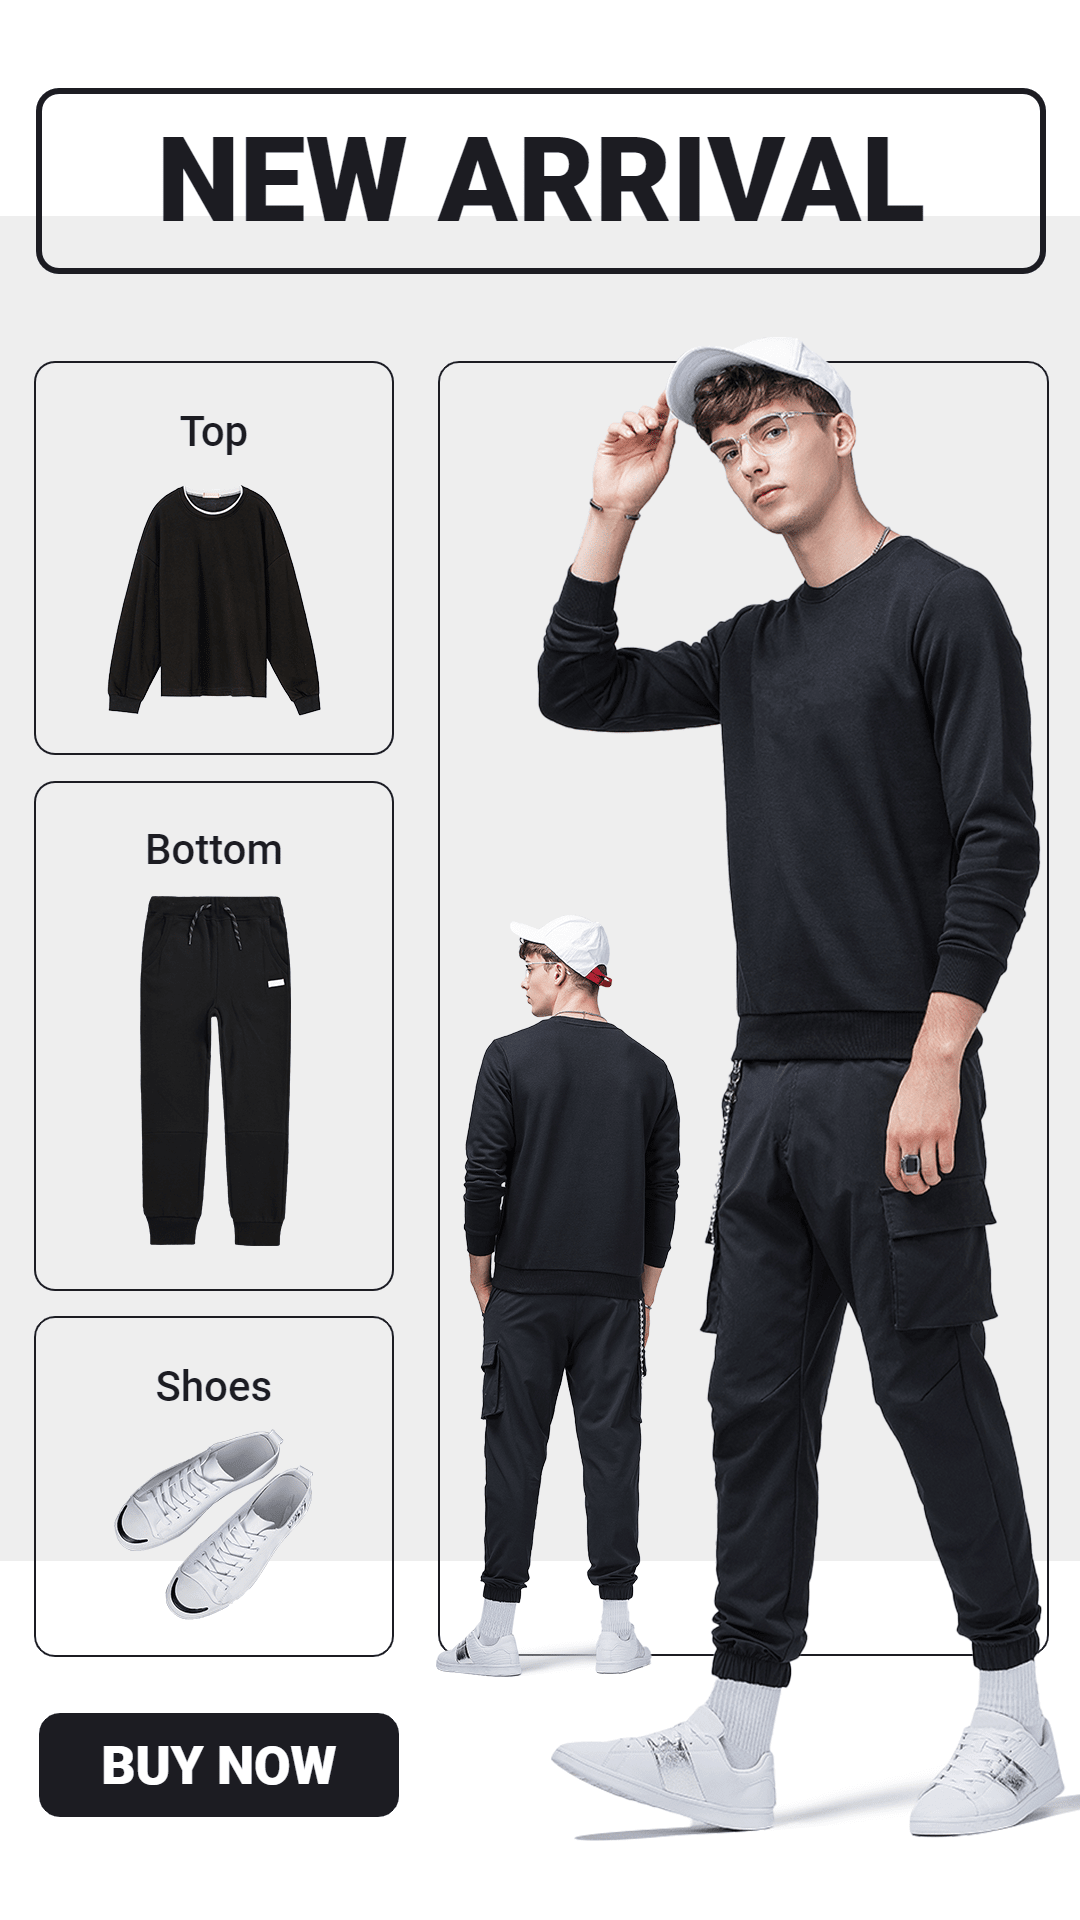 Fashion Men's Wear New Arrival Ecommerce Story